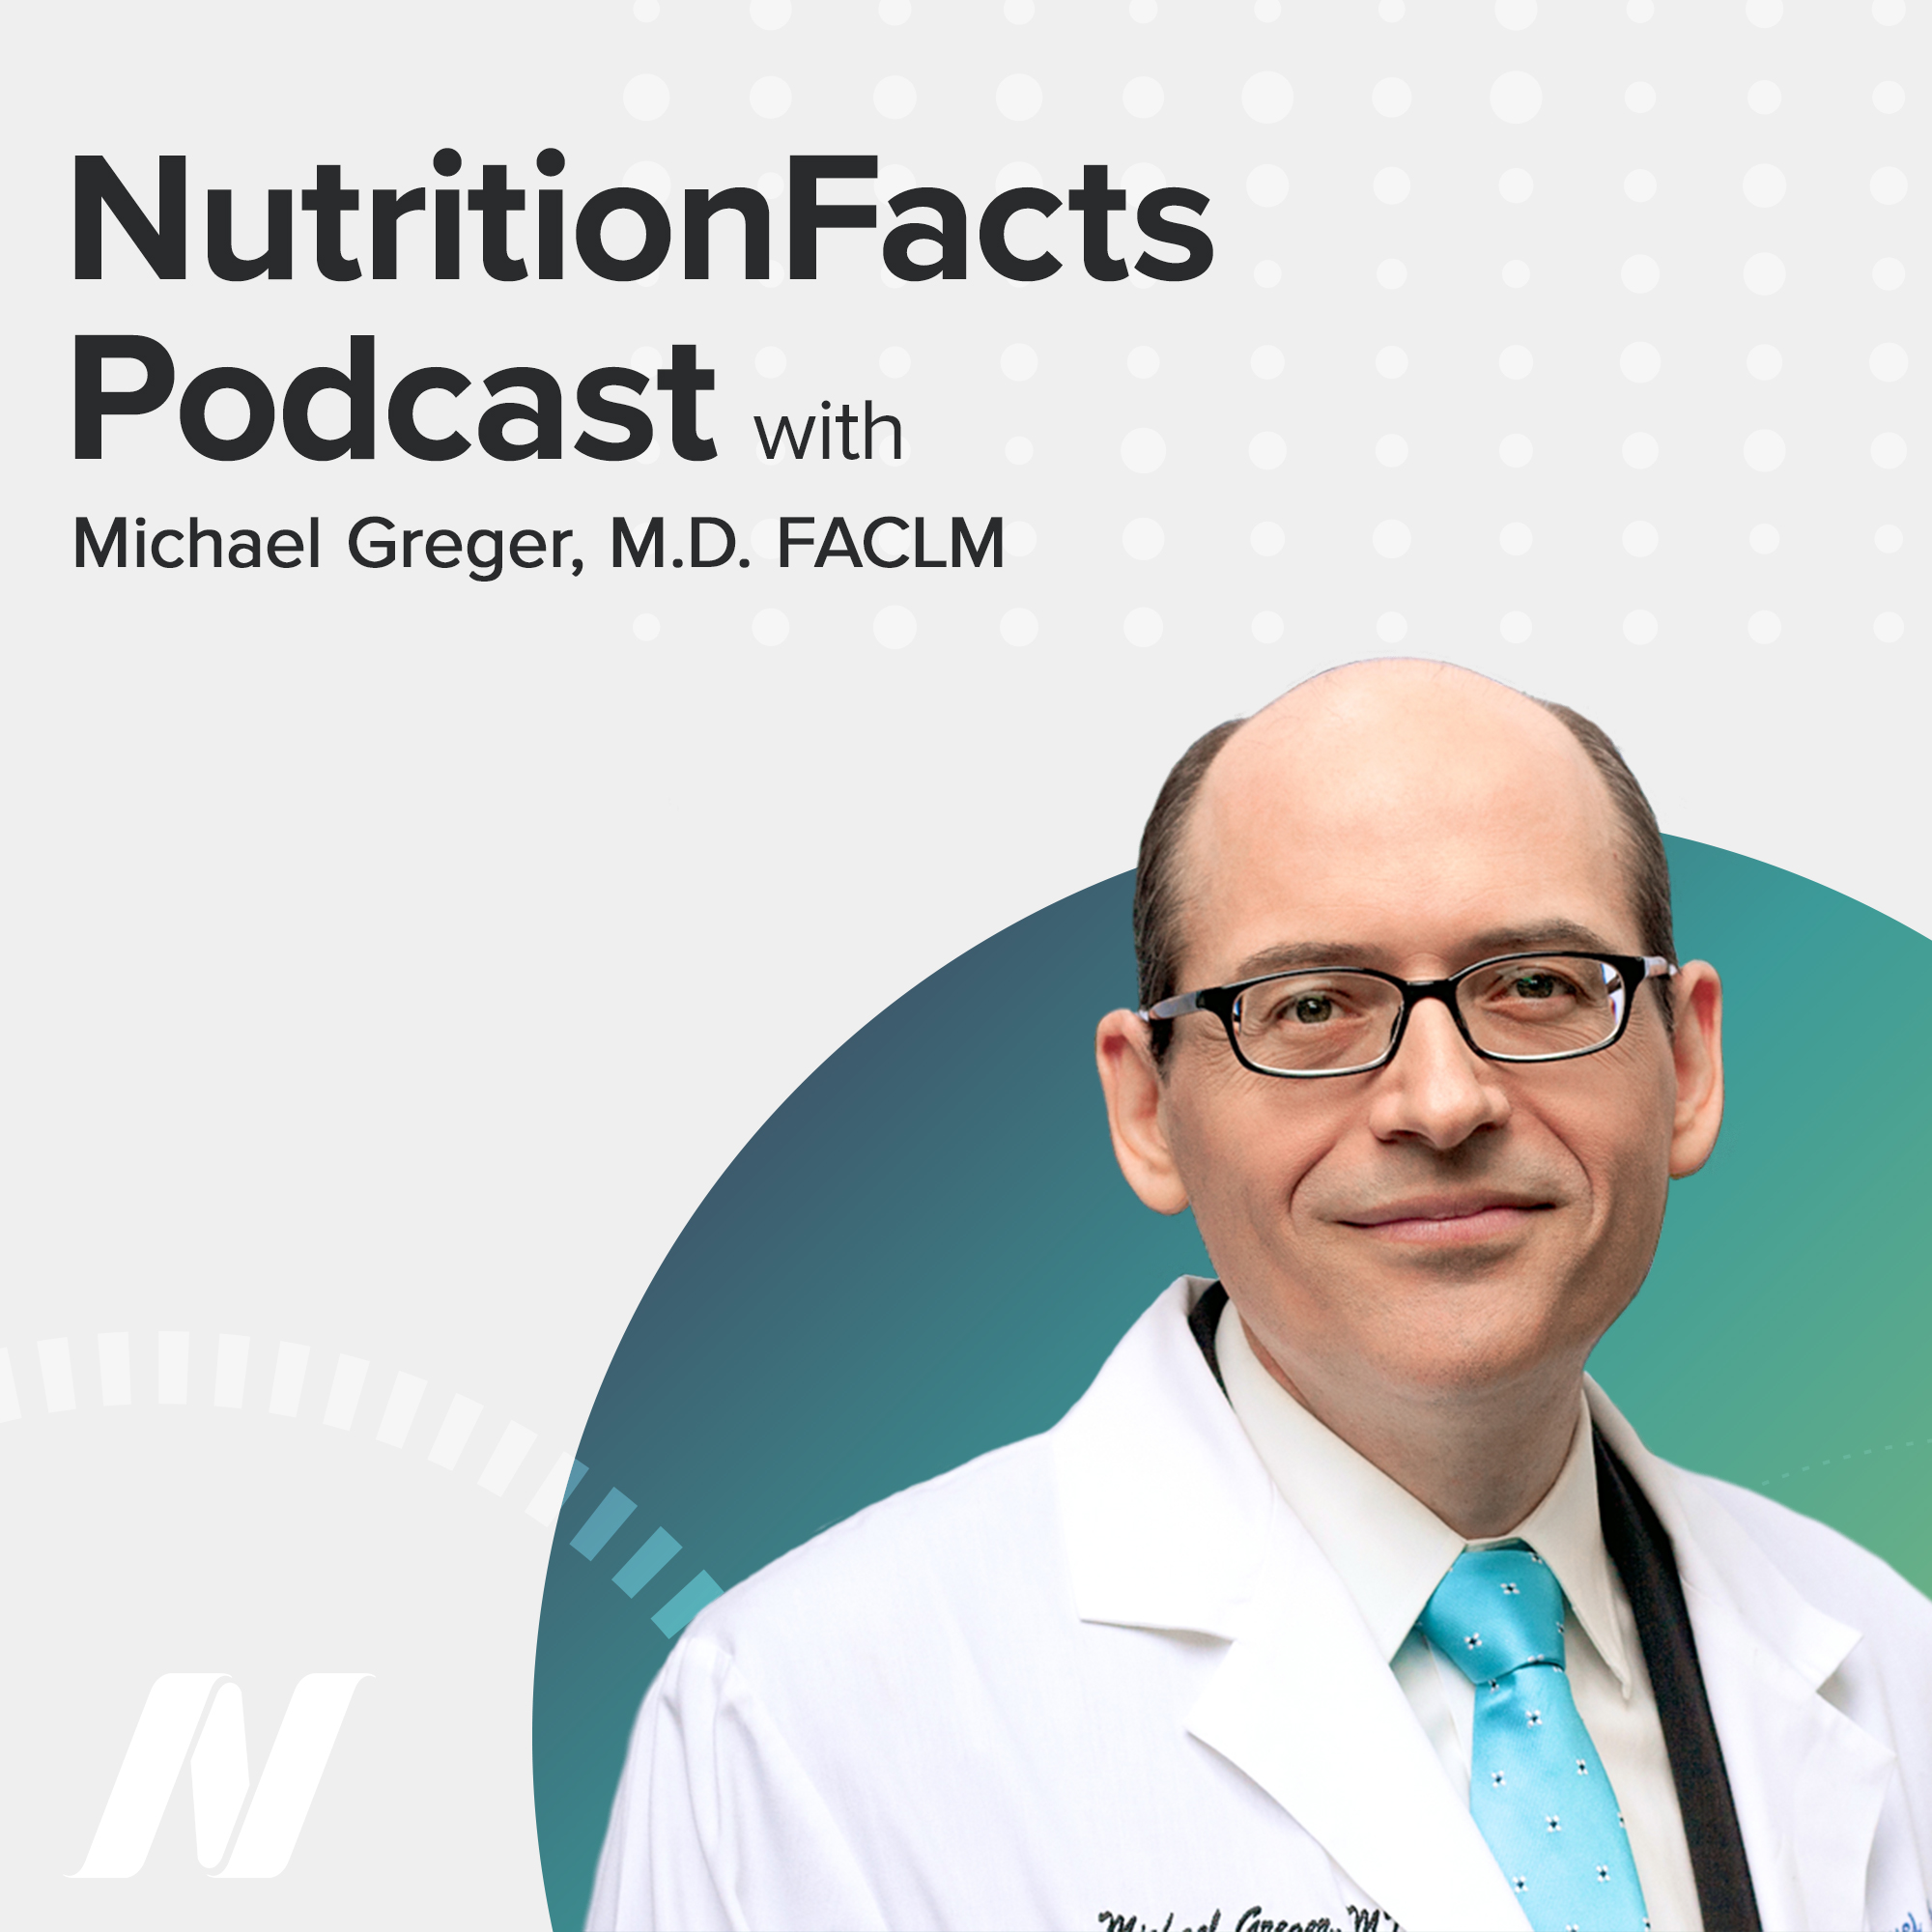 Dr. Michael Greger Speculates Why Vegans Have Higher Bone Fracture Rates